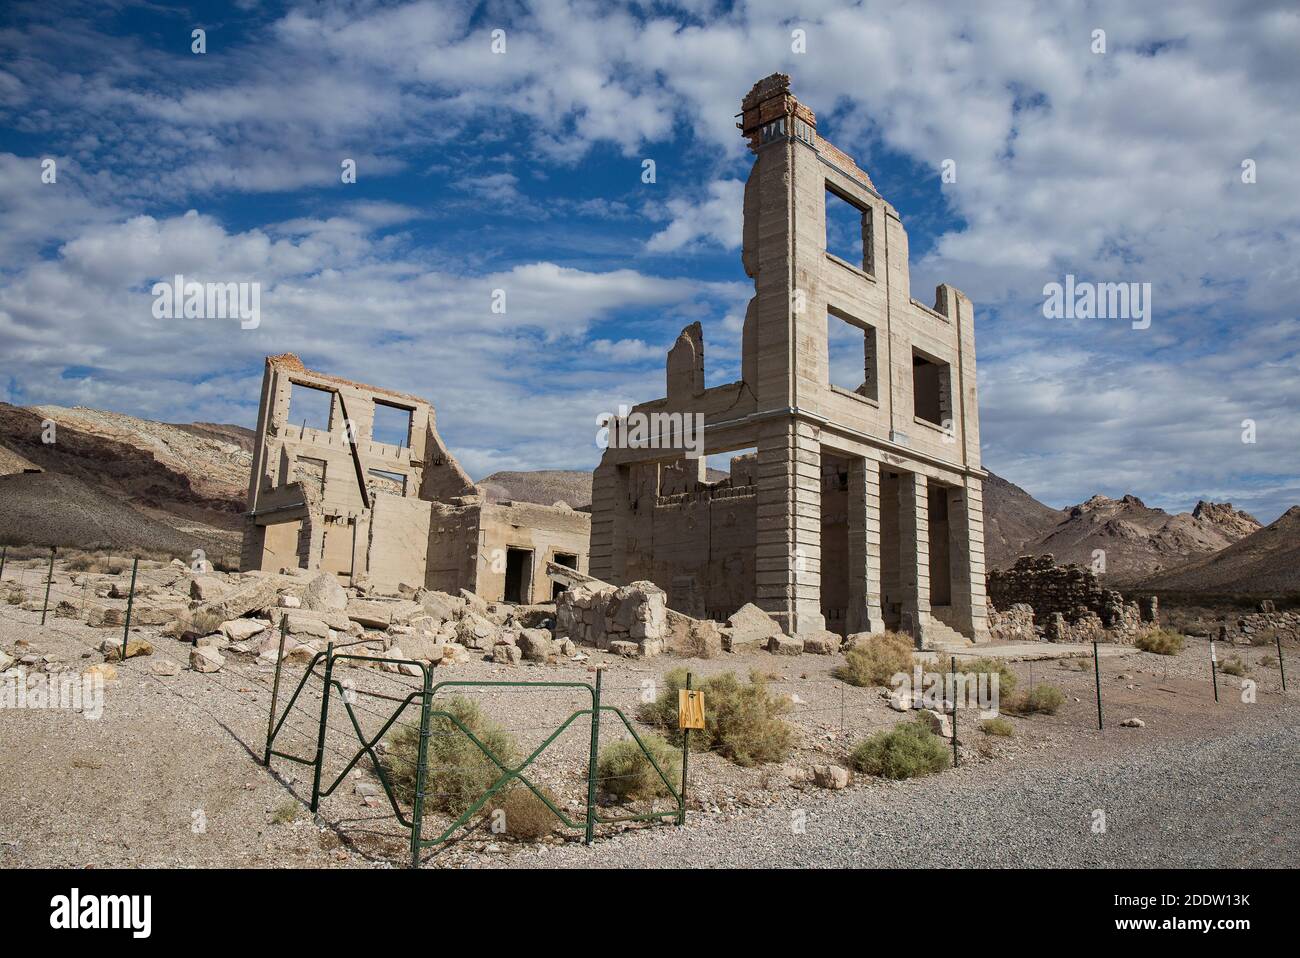 Old bank building at Ghost town Rhyolite, Nevada, USA Stock Photo